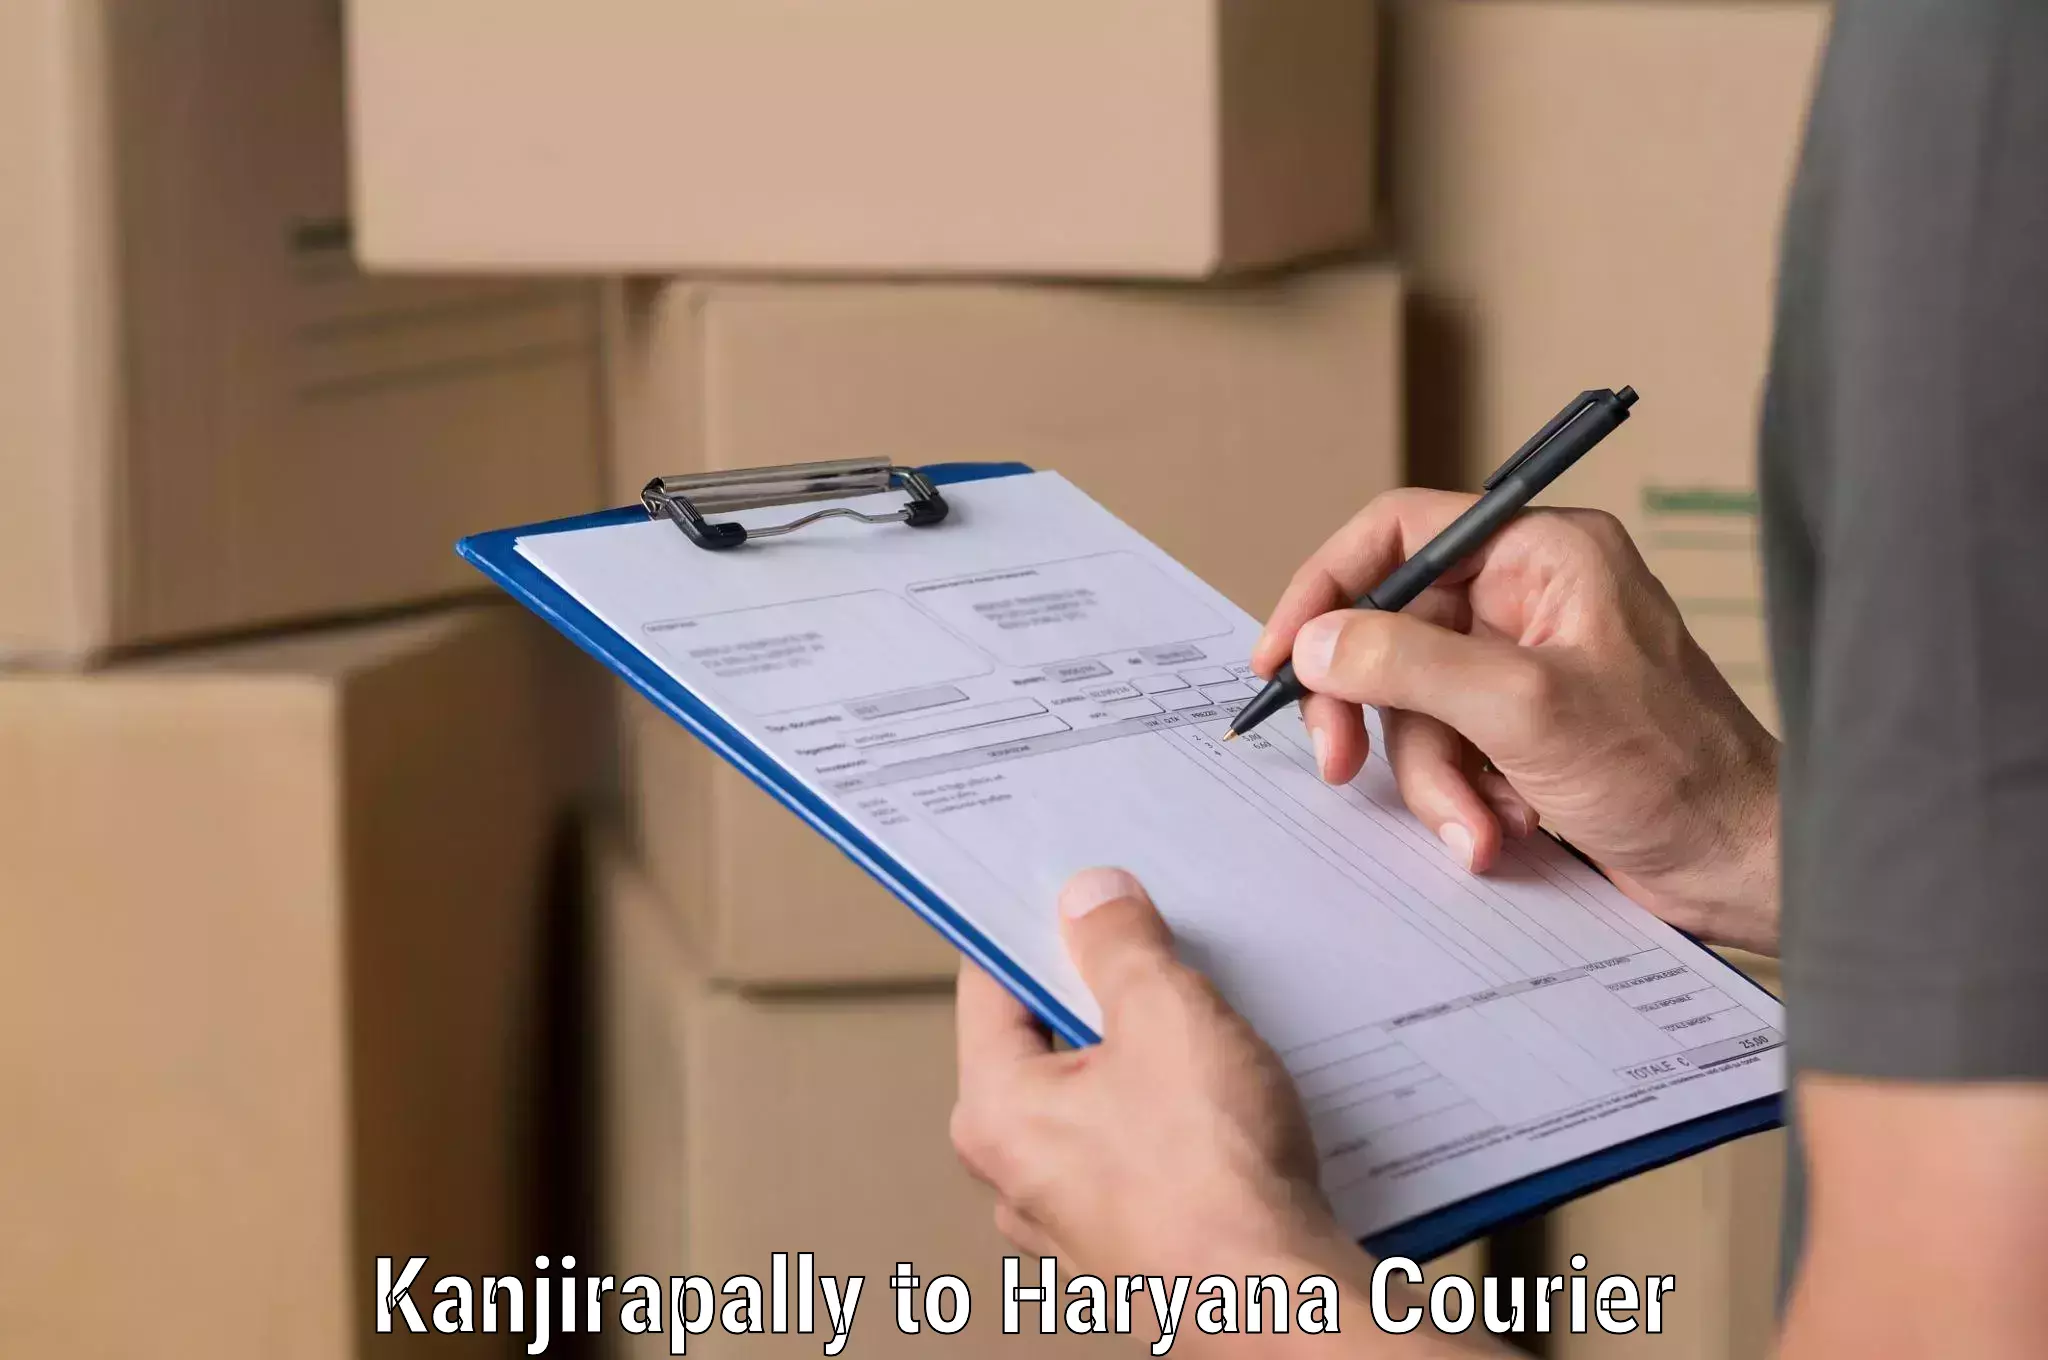 Customizable delivery plans Kanjirapally to Gurgaon